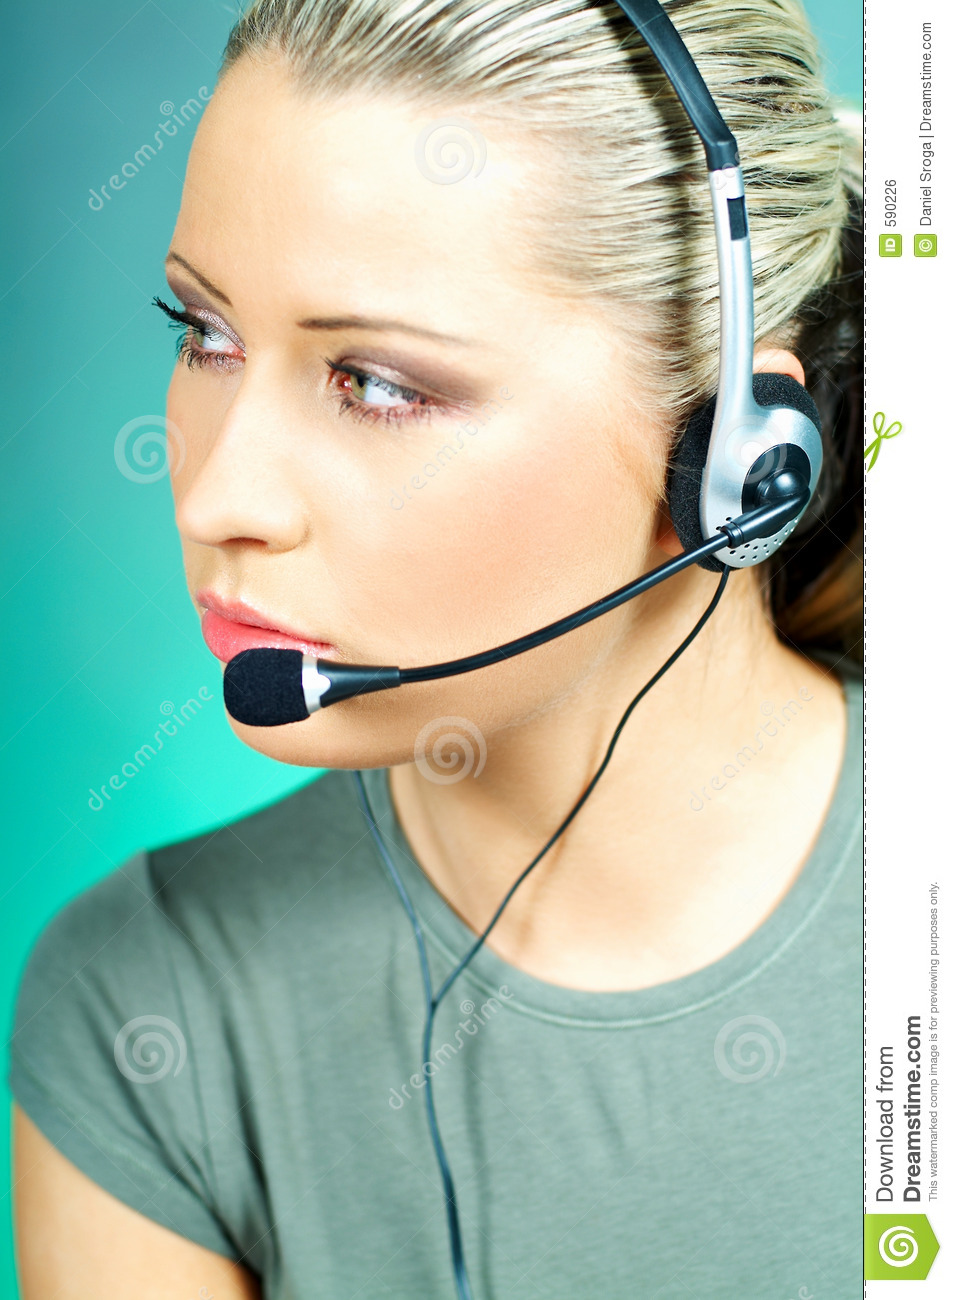 Call Center Agent Royalty Free Stock Image   Image  590226